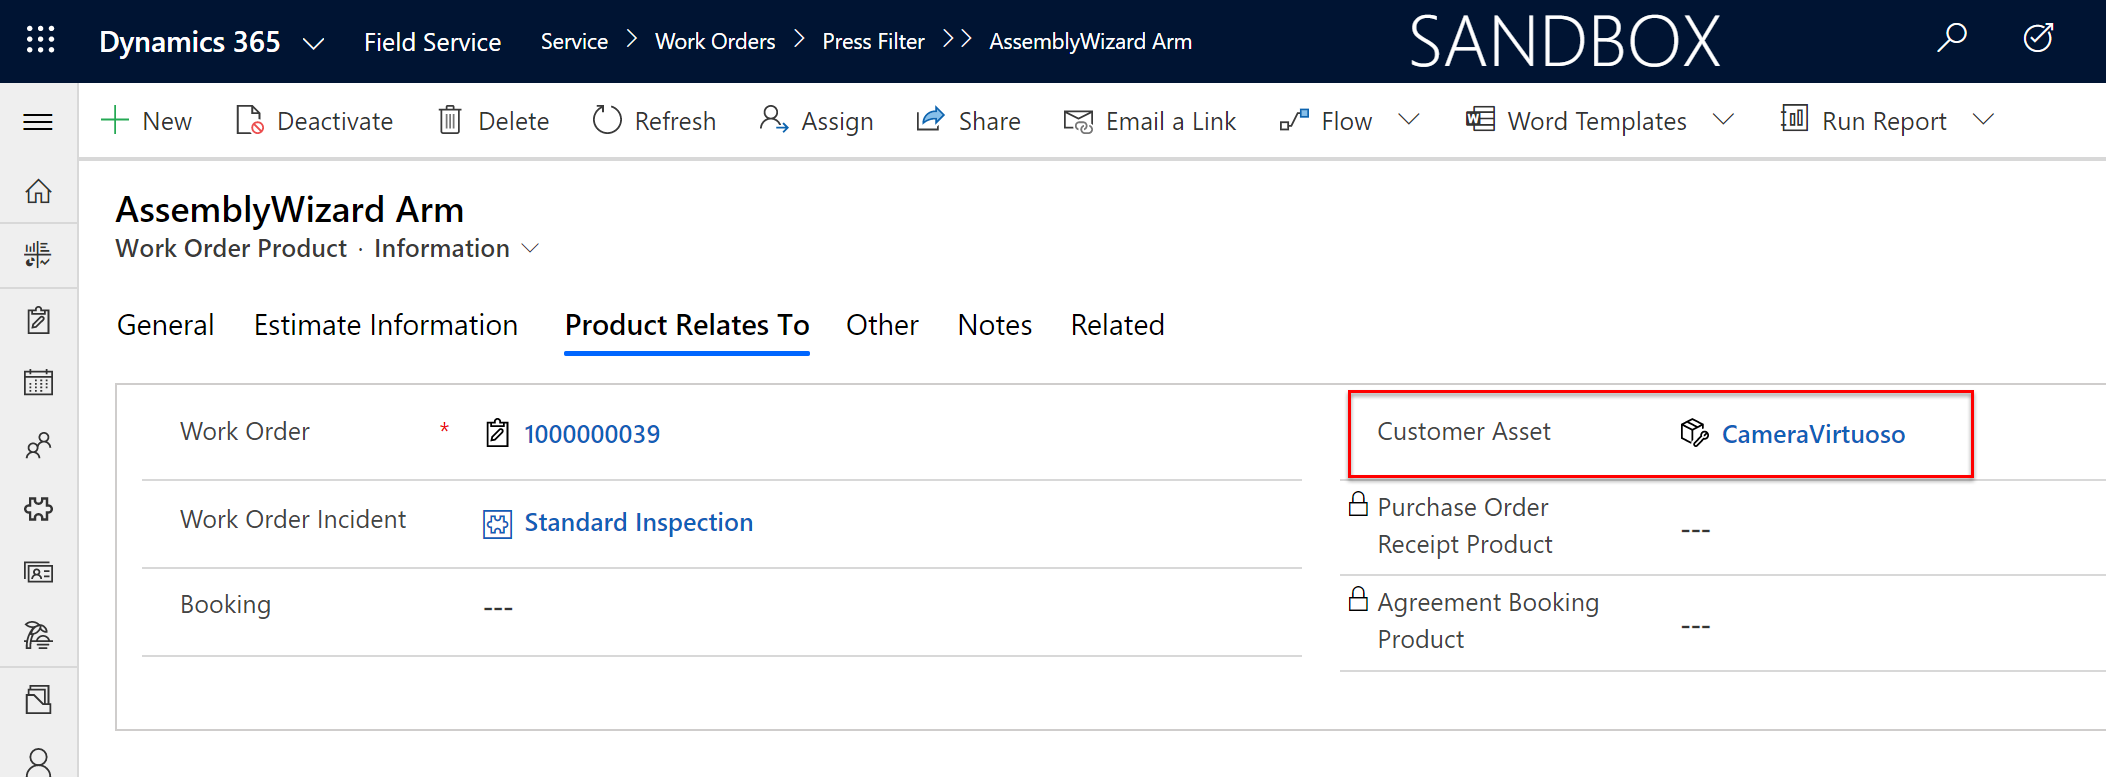 Screenshot of a work order product showing the related customer asset.